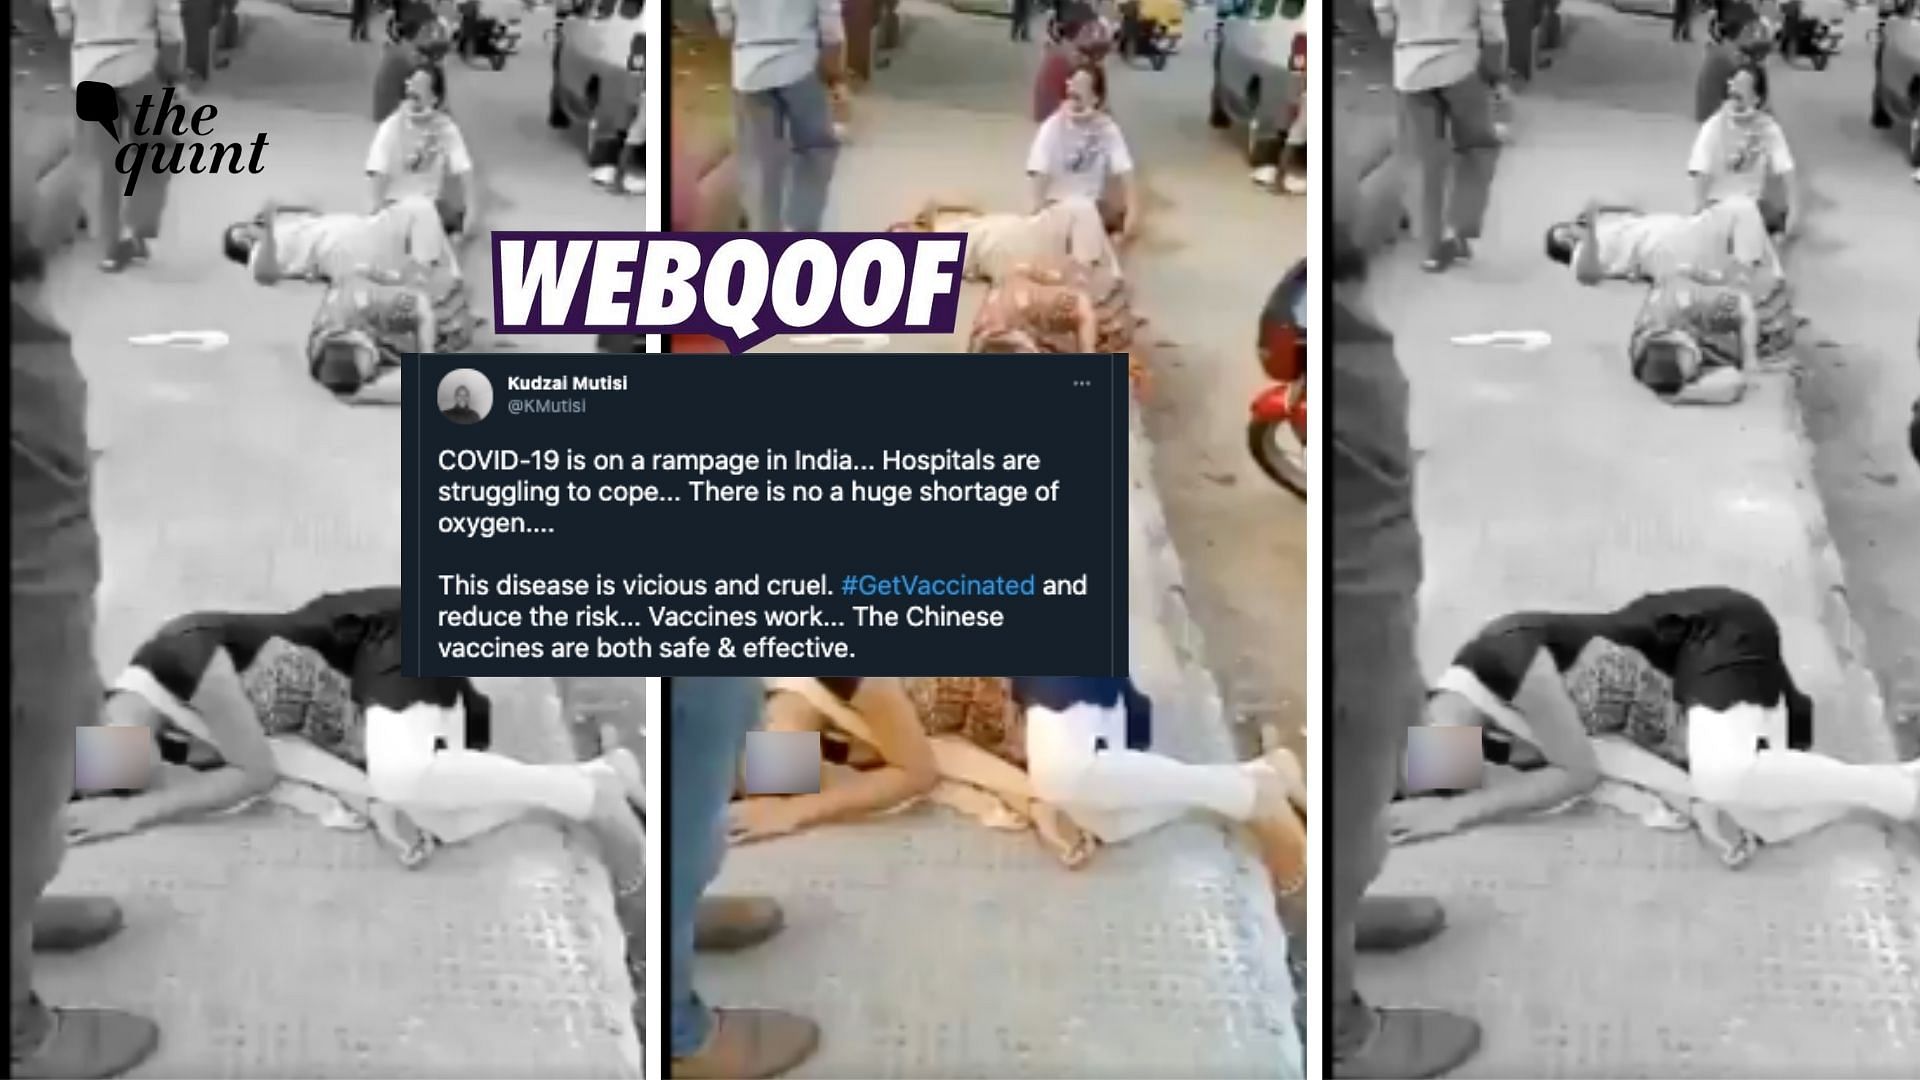 A video showing bystanders falling unconscious on the streets is being shared on social media with a claim that it depicts India’s COVID-19 situation.